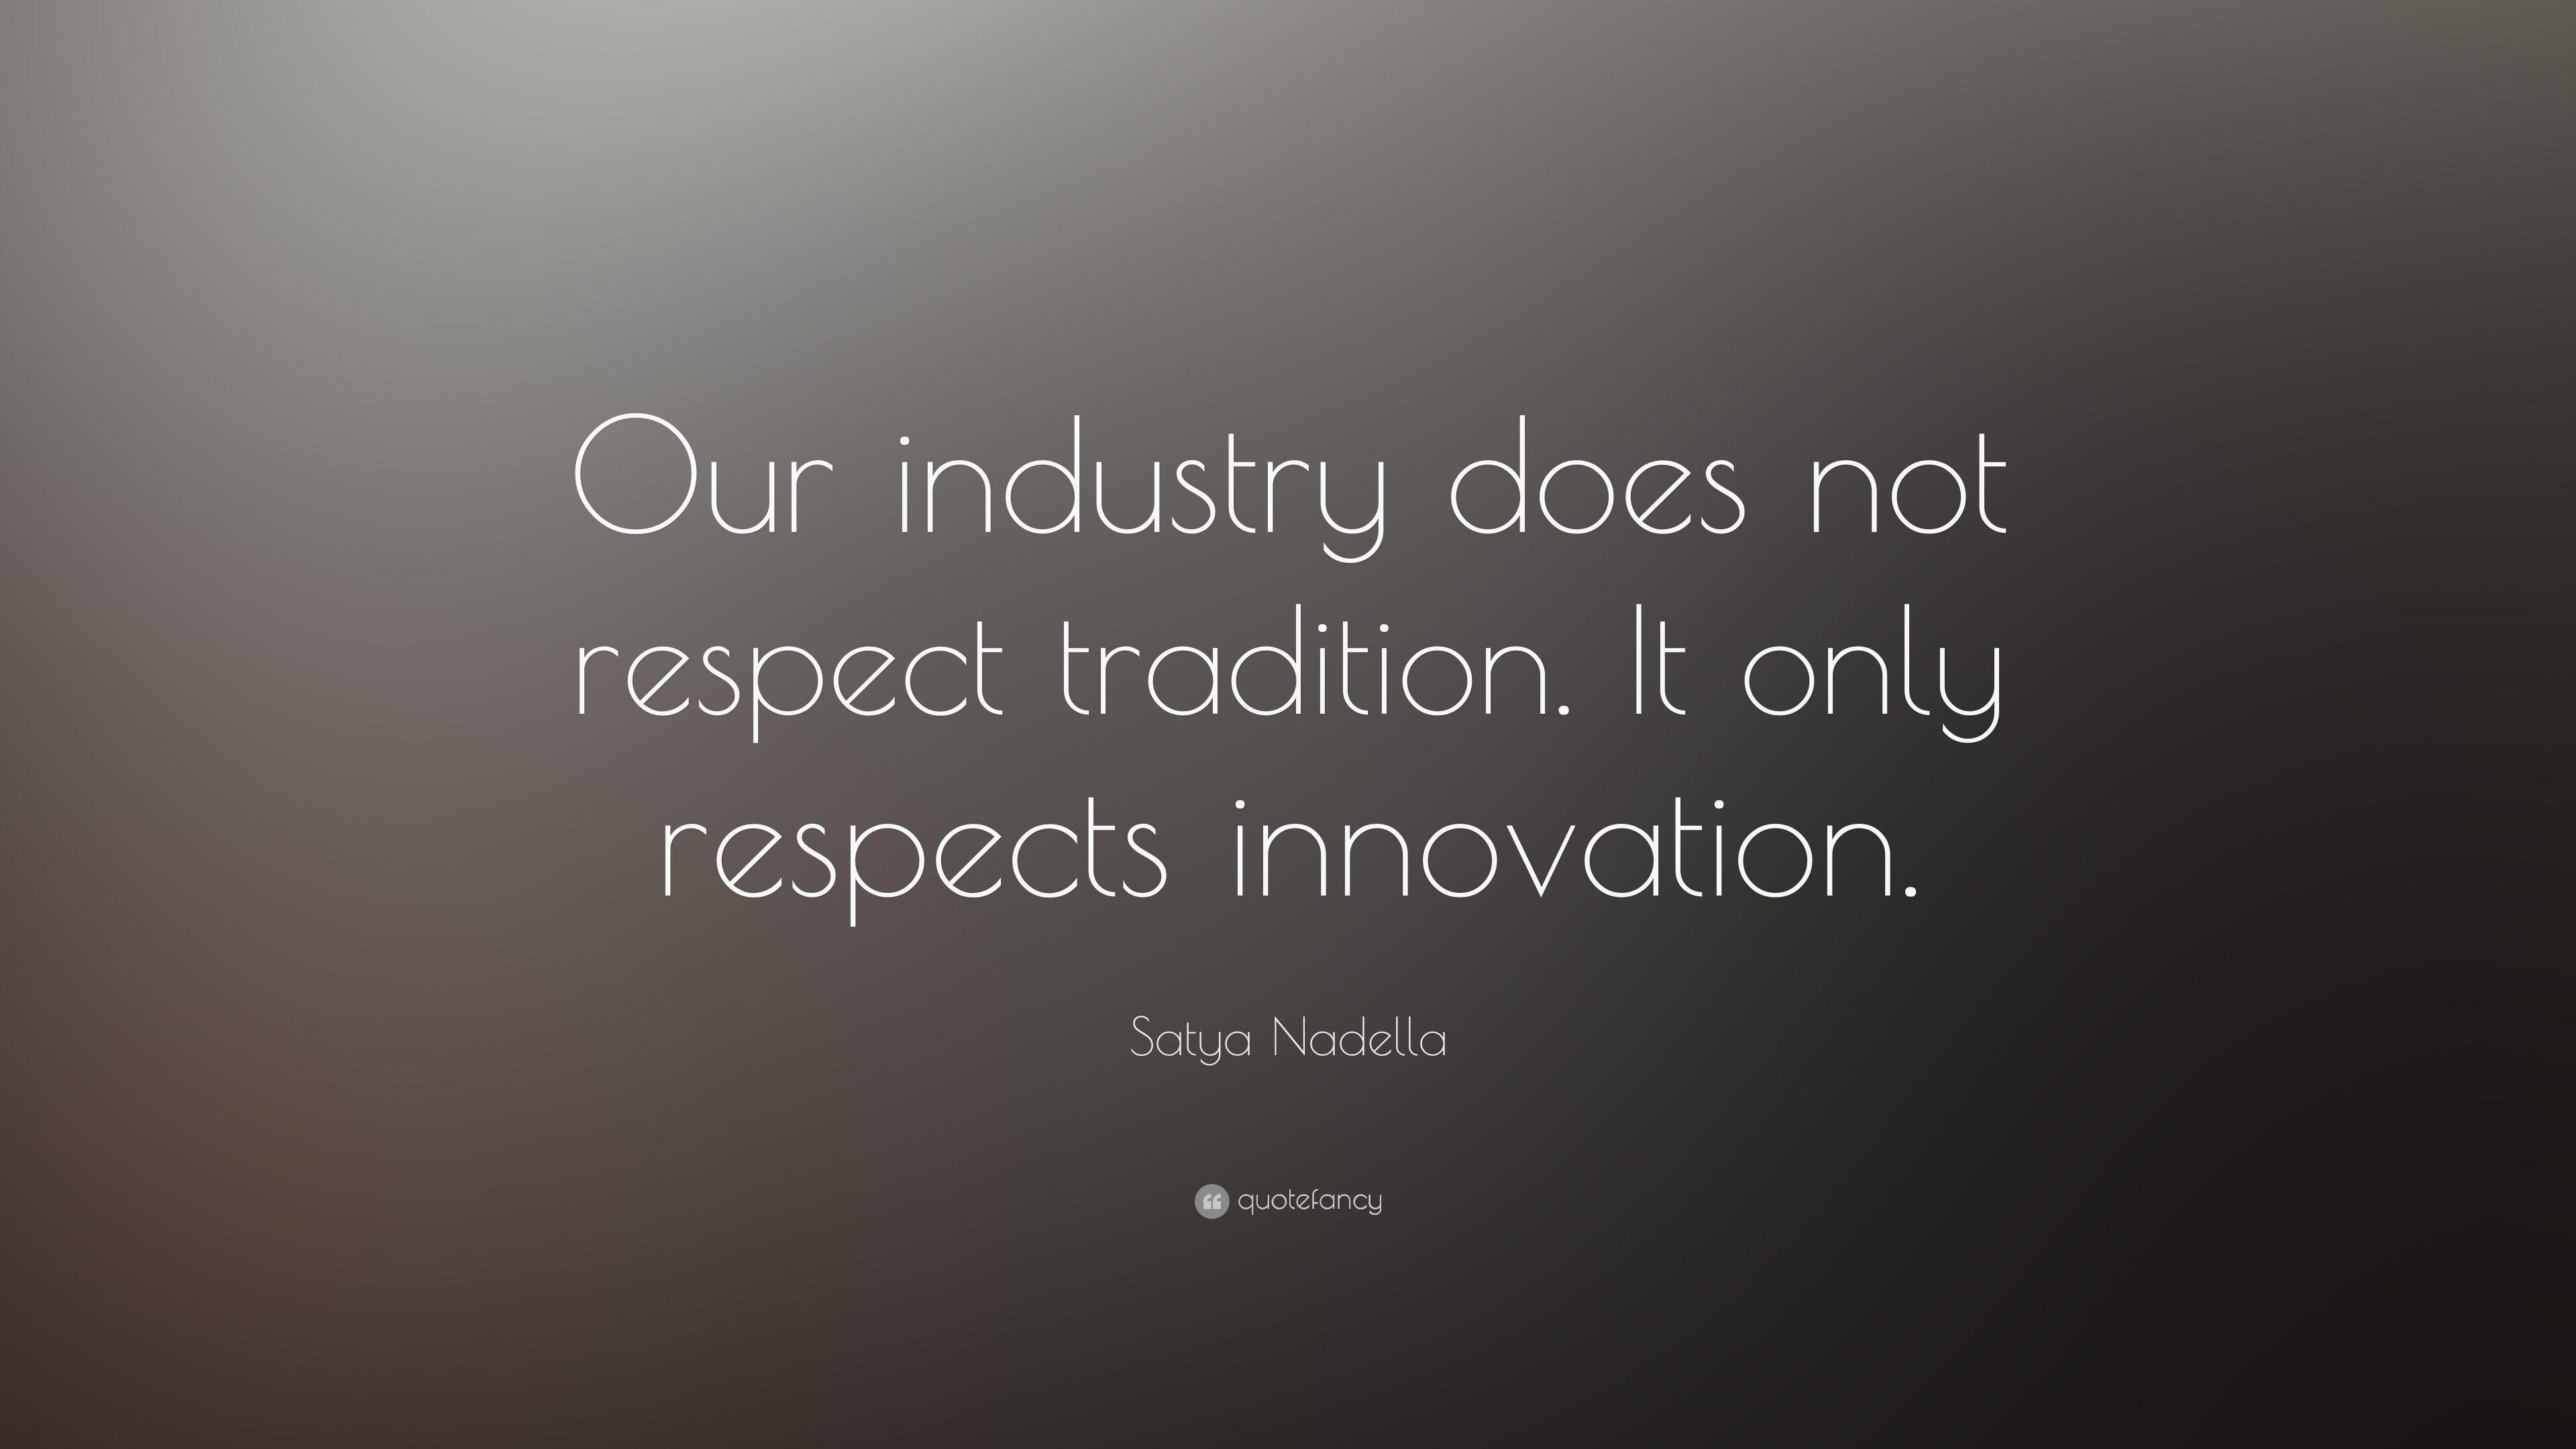 Satya Nadella Quote: “Our industry does not respect tradition. It